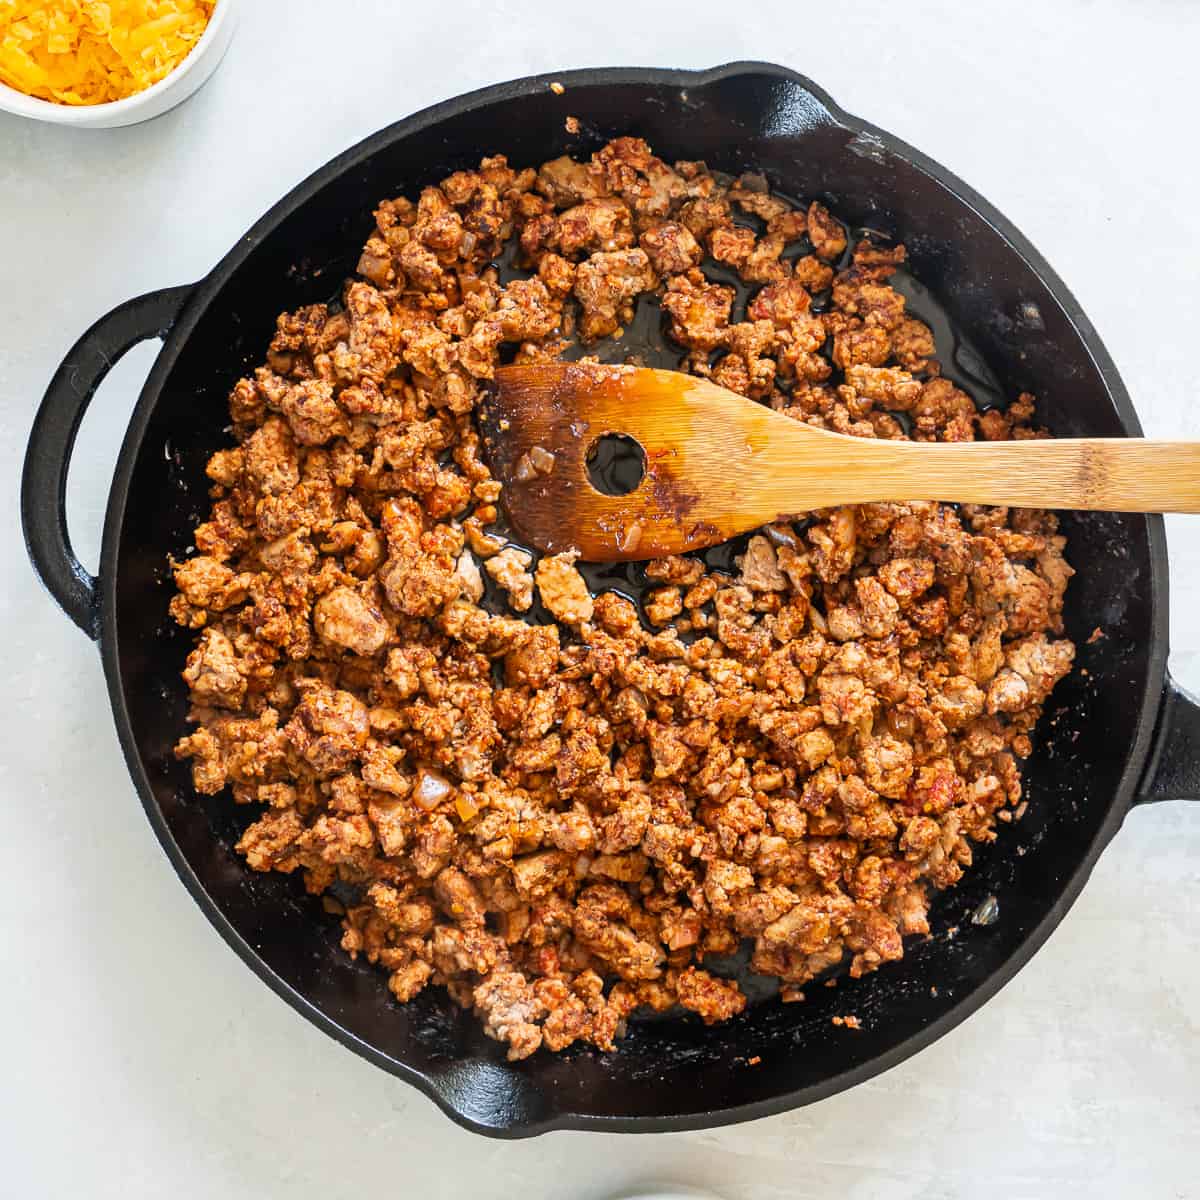 Cooked ground turkey taco filling in a cast iron skillet with a wooden spoon.